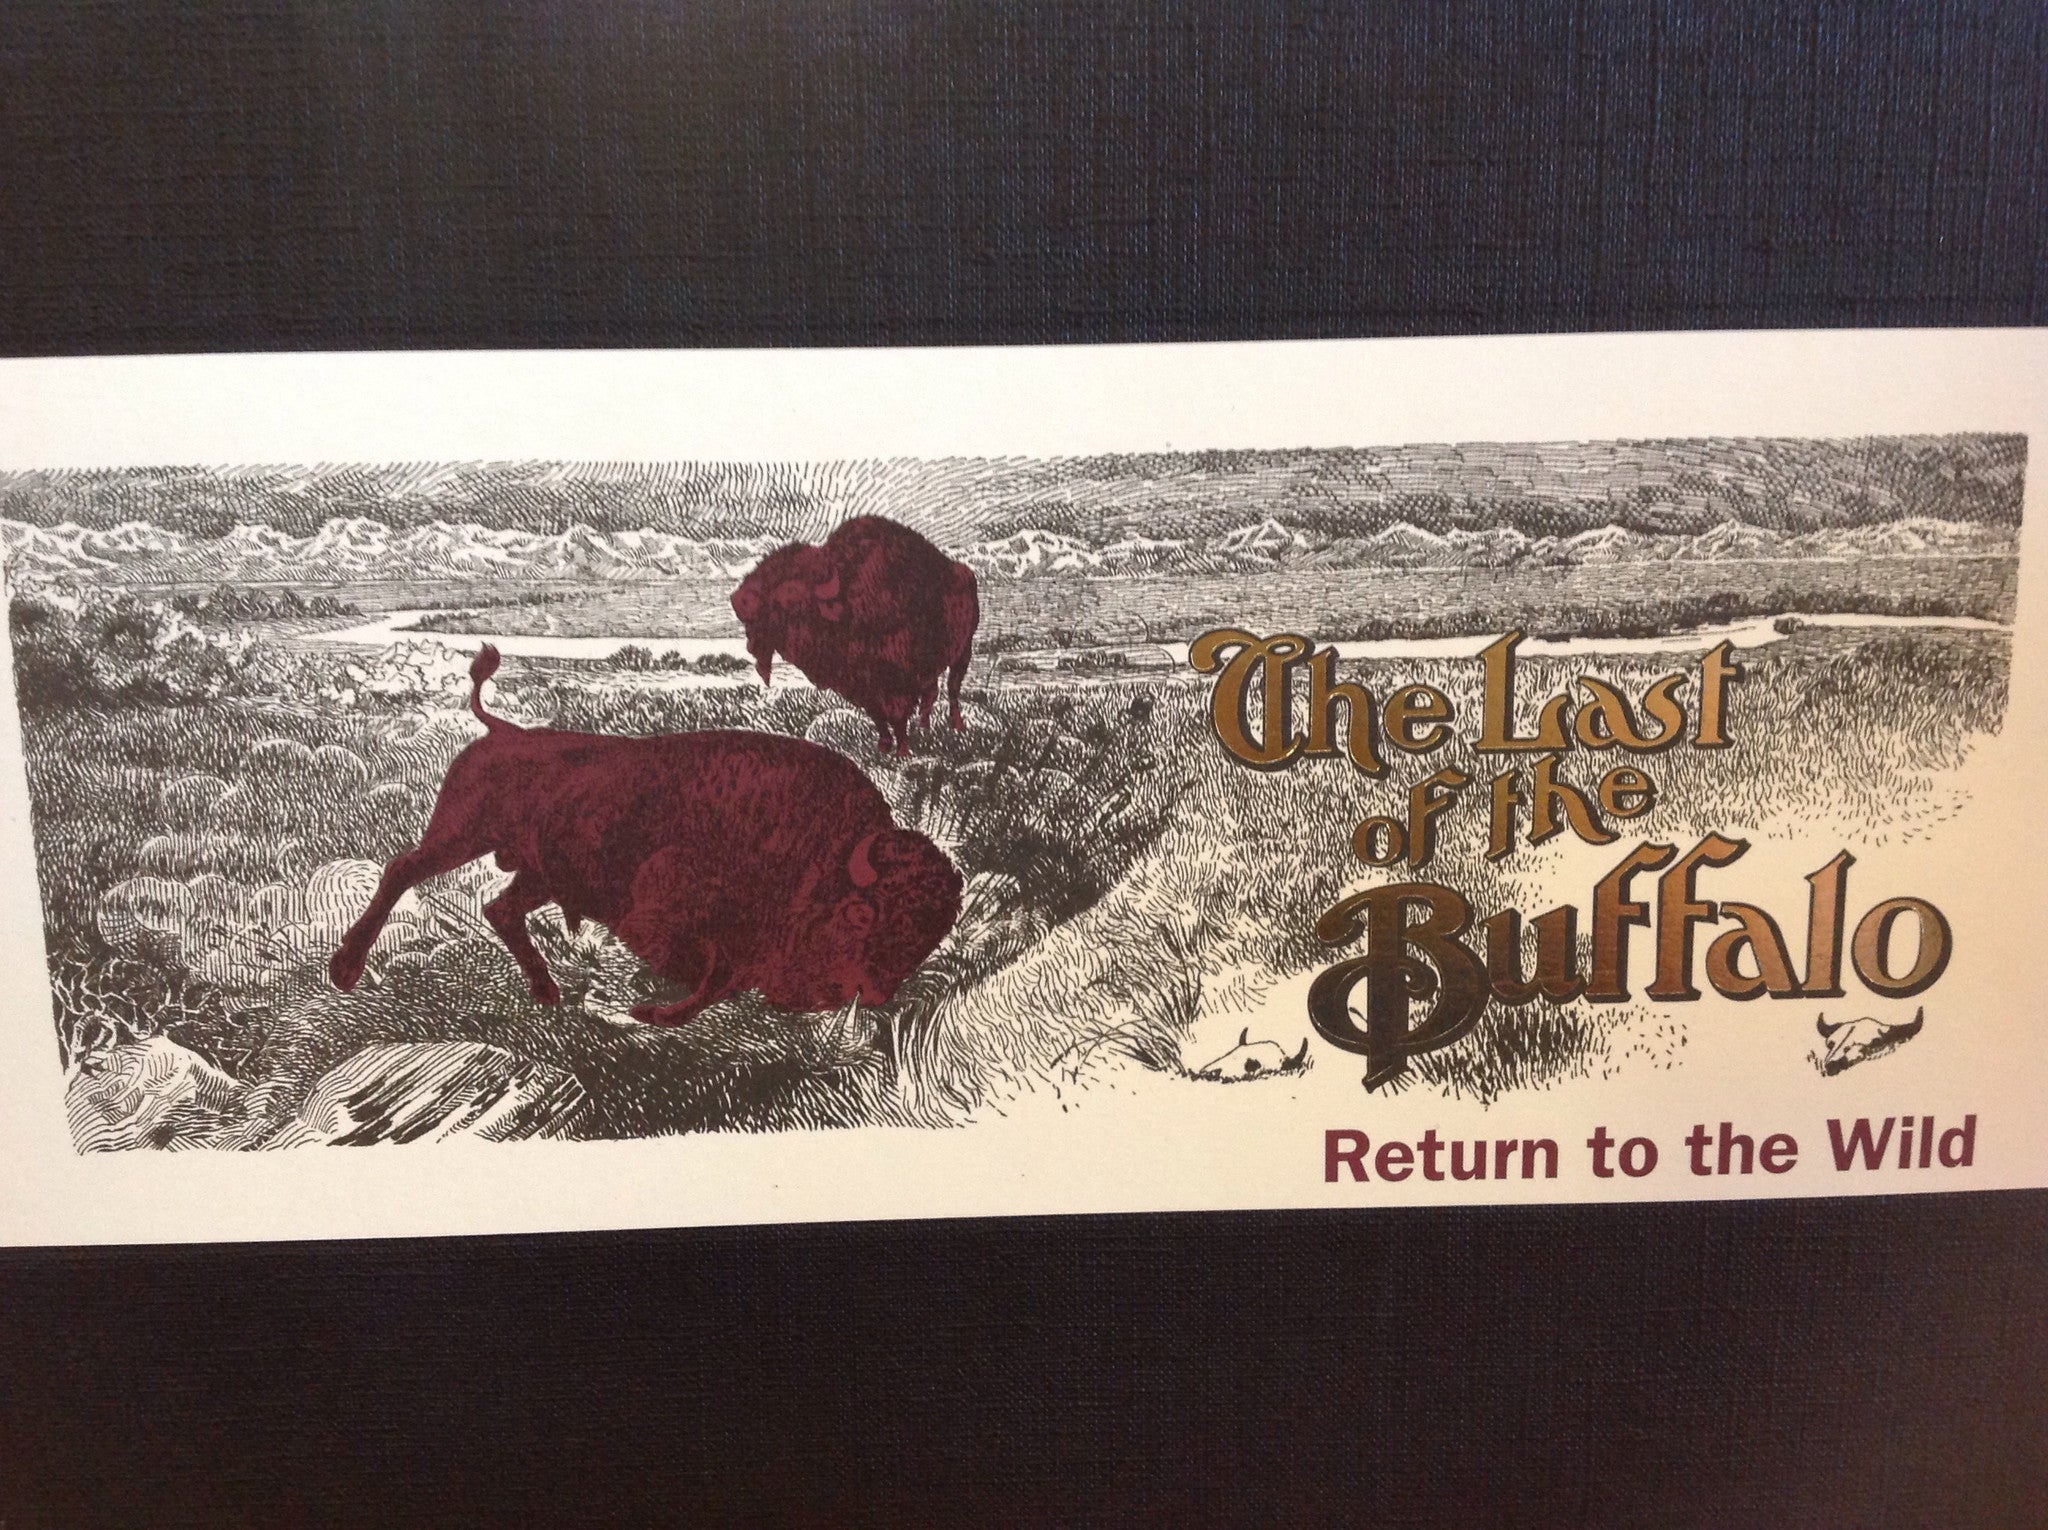 BOOKS - The Last of the Buffalo: Return to the Wild